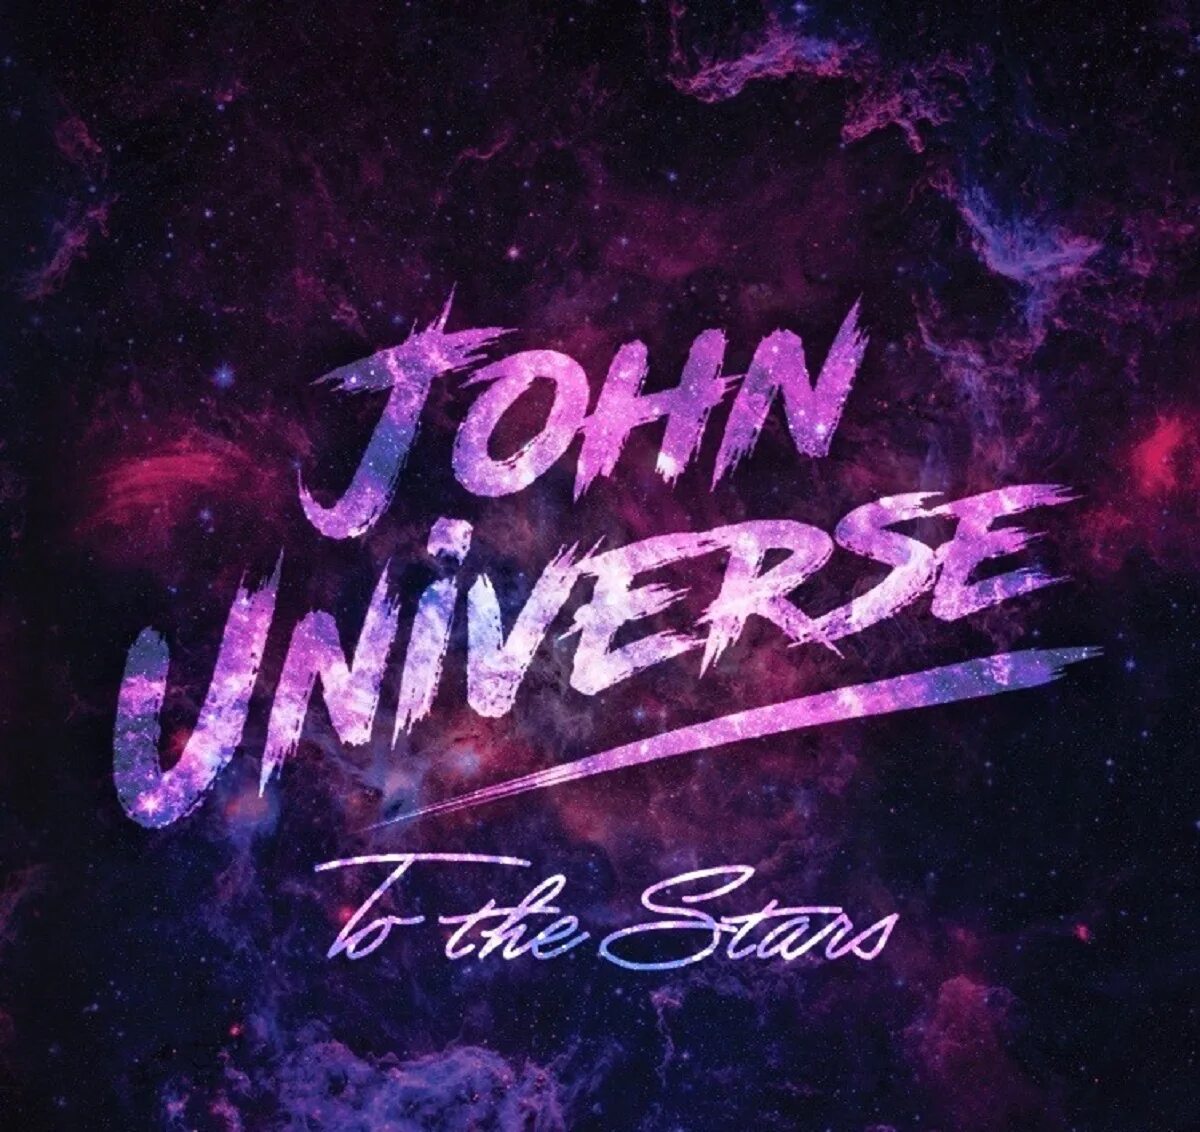 Stranger Universe. To the Stars. Together to the Stars. Through the Thorns to the Stars тату. Through the stars